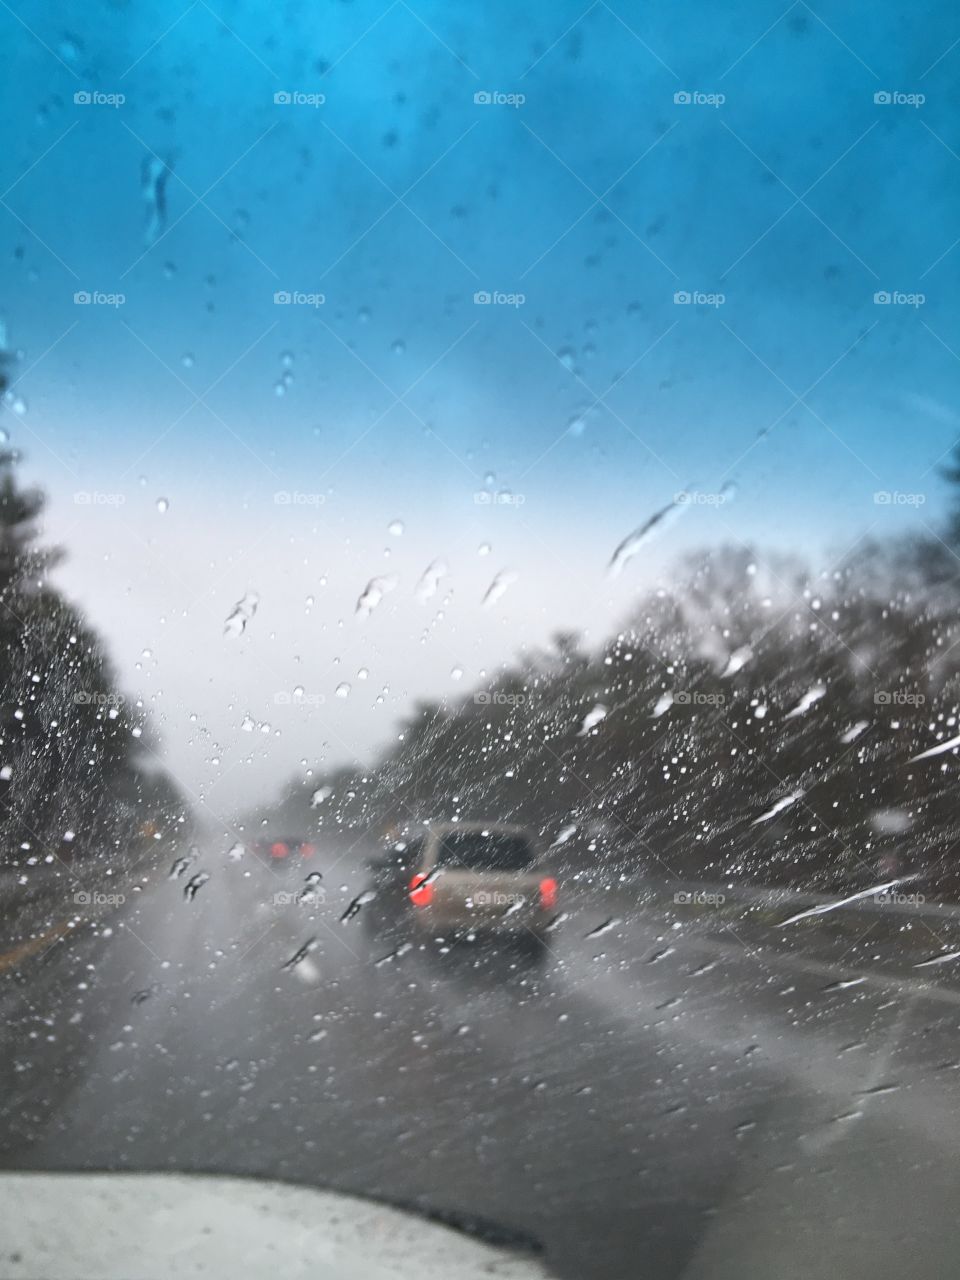 Raining Up On Windshield During Storm